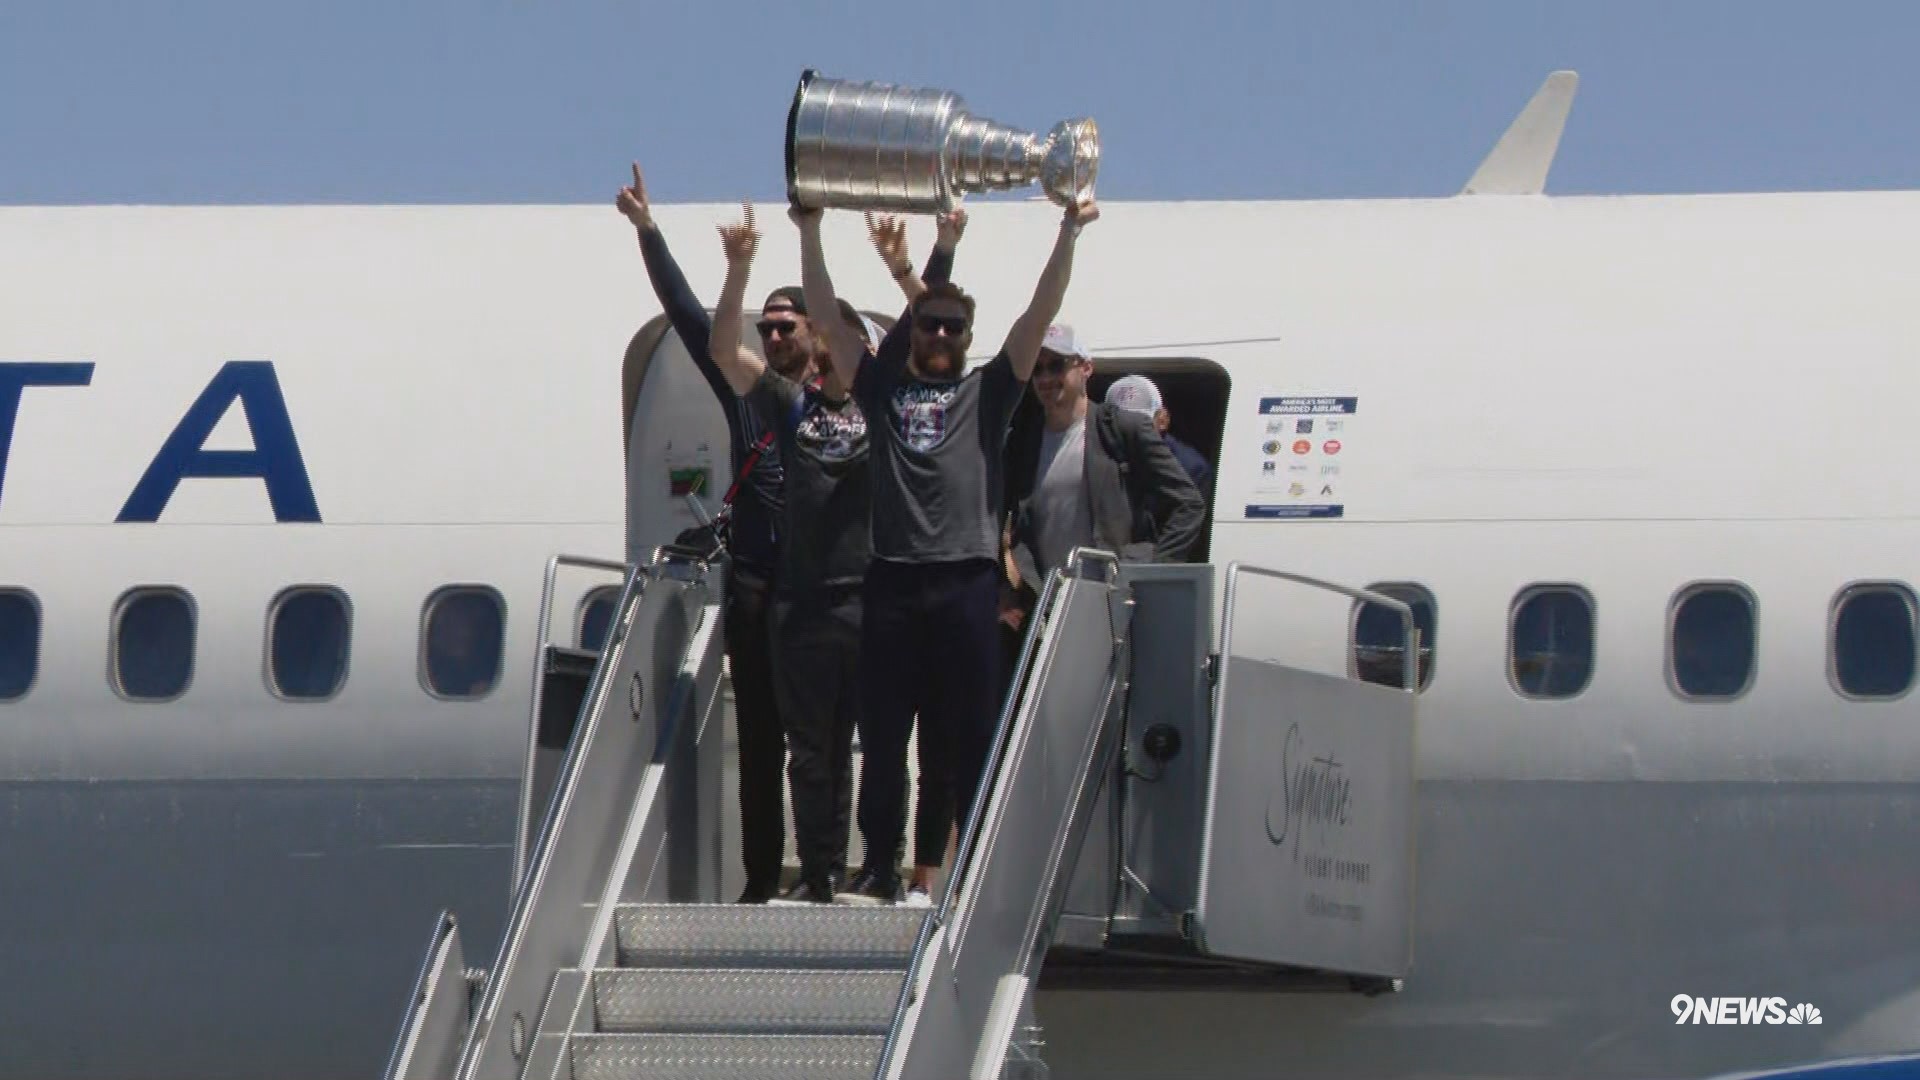 The Colorado Avalanche are back in Denver after Sunday night’s Game 6 victory over the Tampa Bay Lightning to win the Stanley Cup.